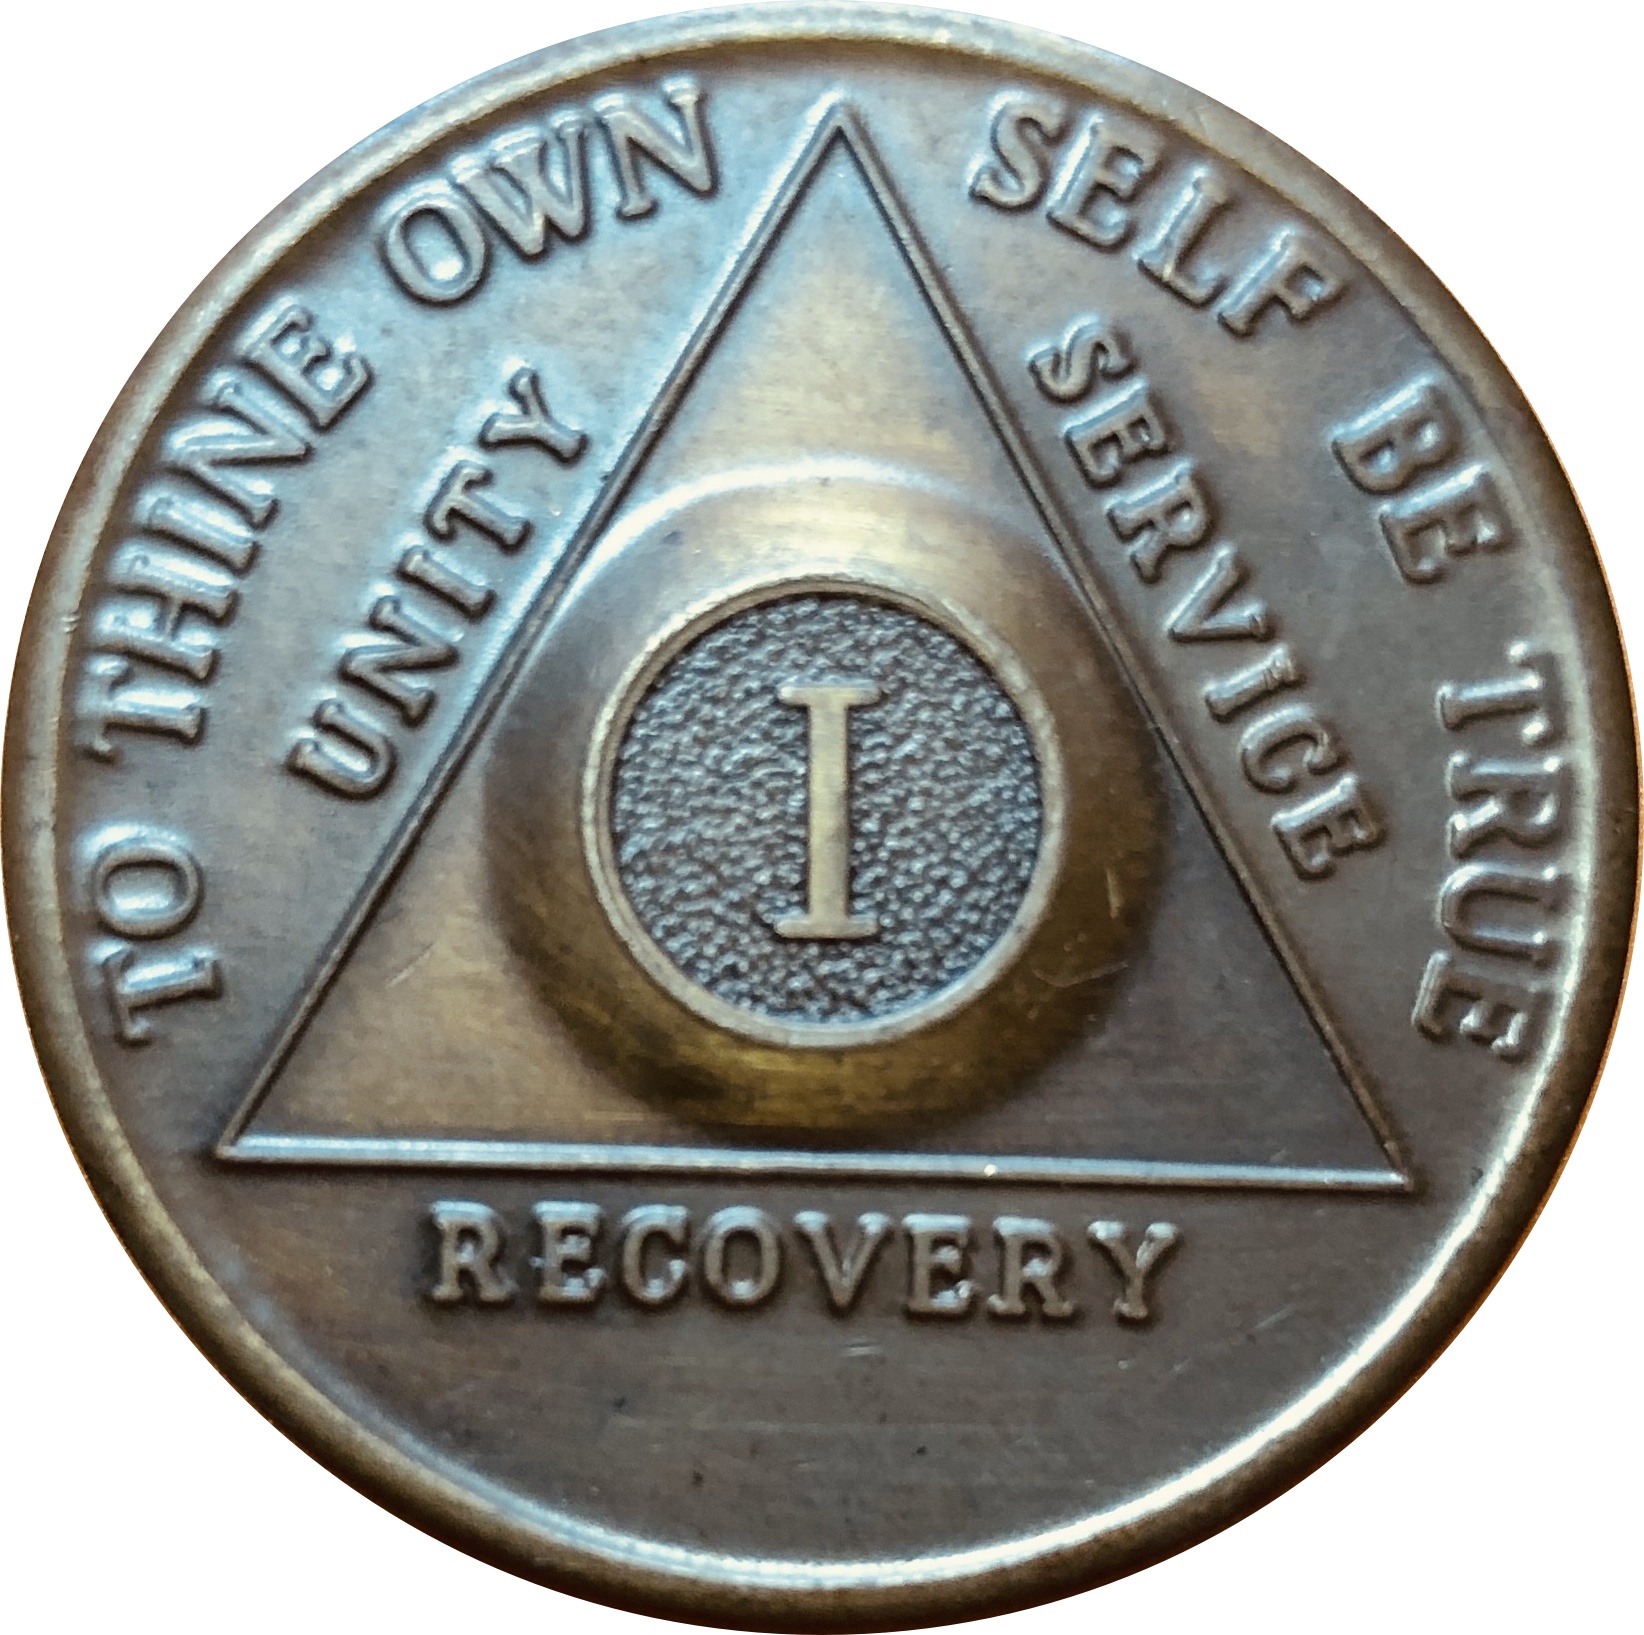 26 Year AA Medallions - Twenty-Six Year Alcoholics Anonymous Coins and Chips — AA Medallion Store